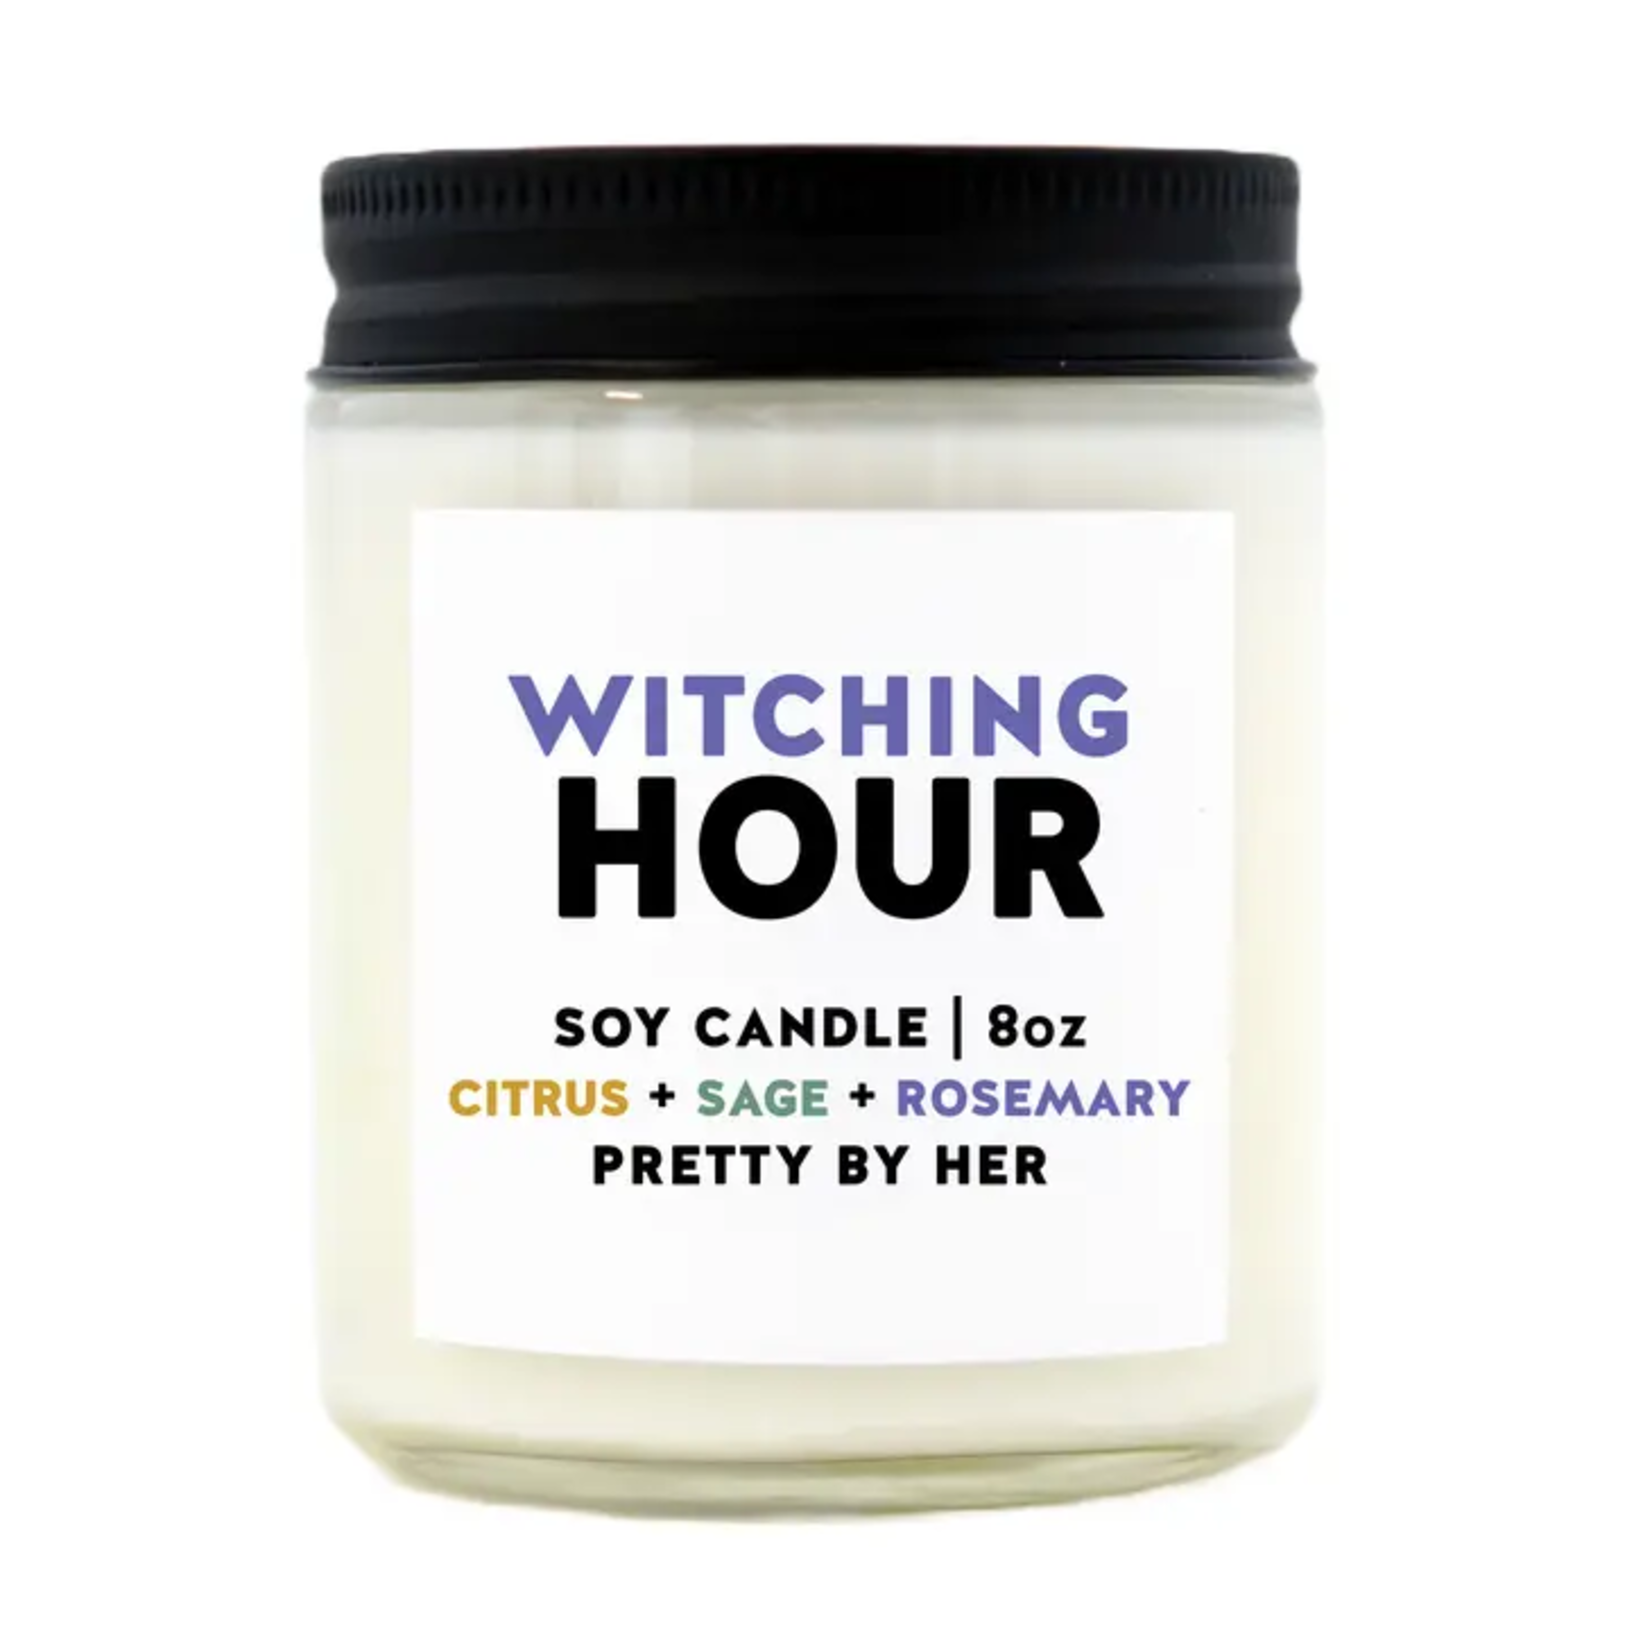 Soy Candle - Witching Hour